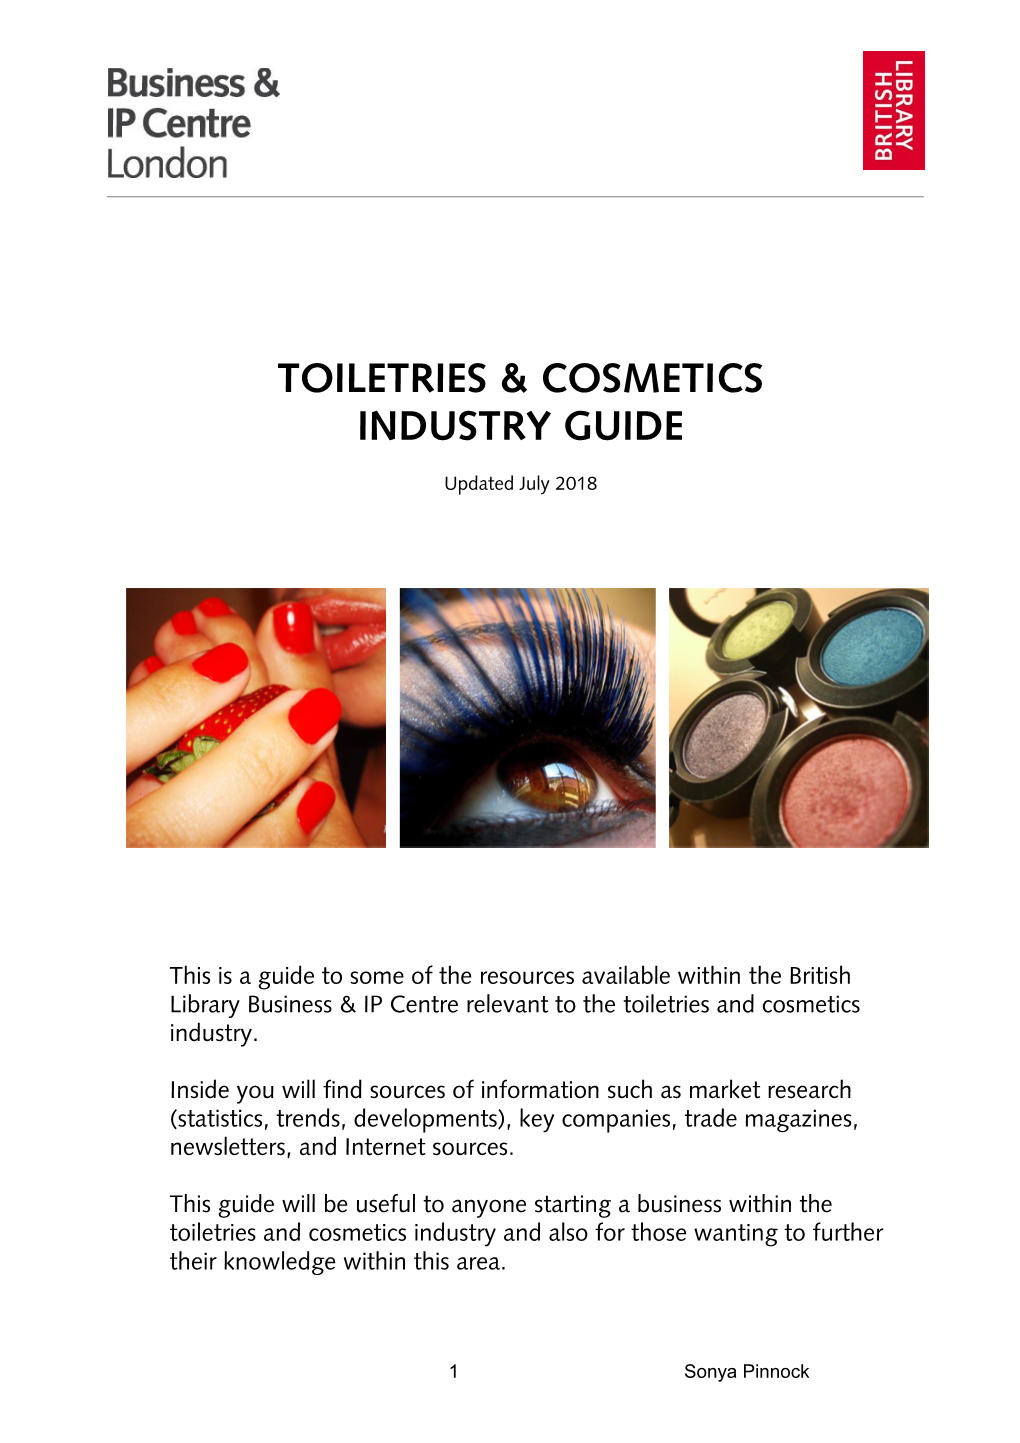 Toiletries & Cosmetics Industry Guide